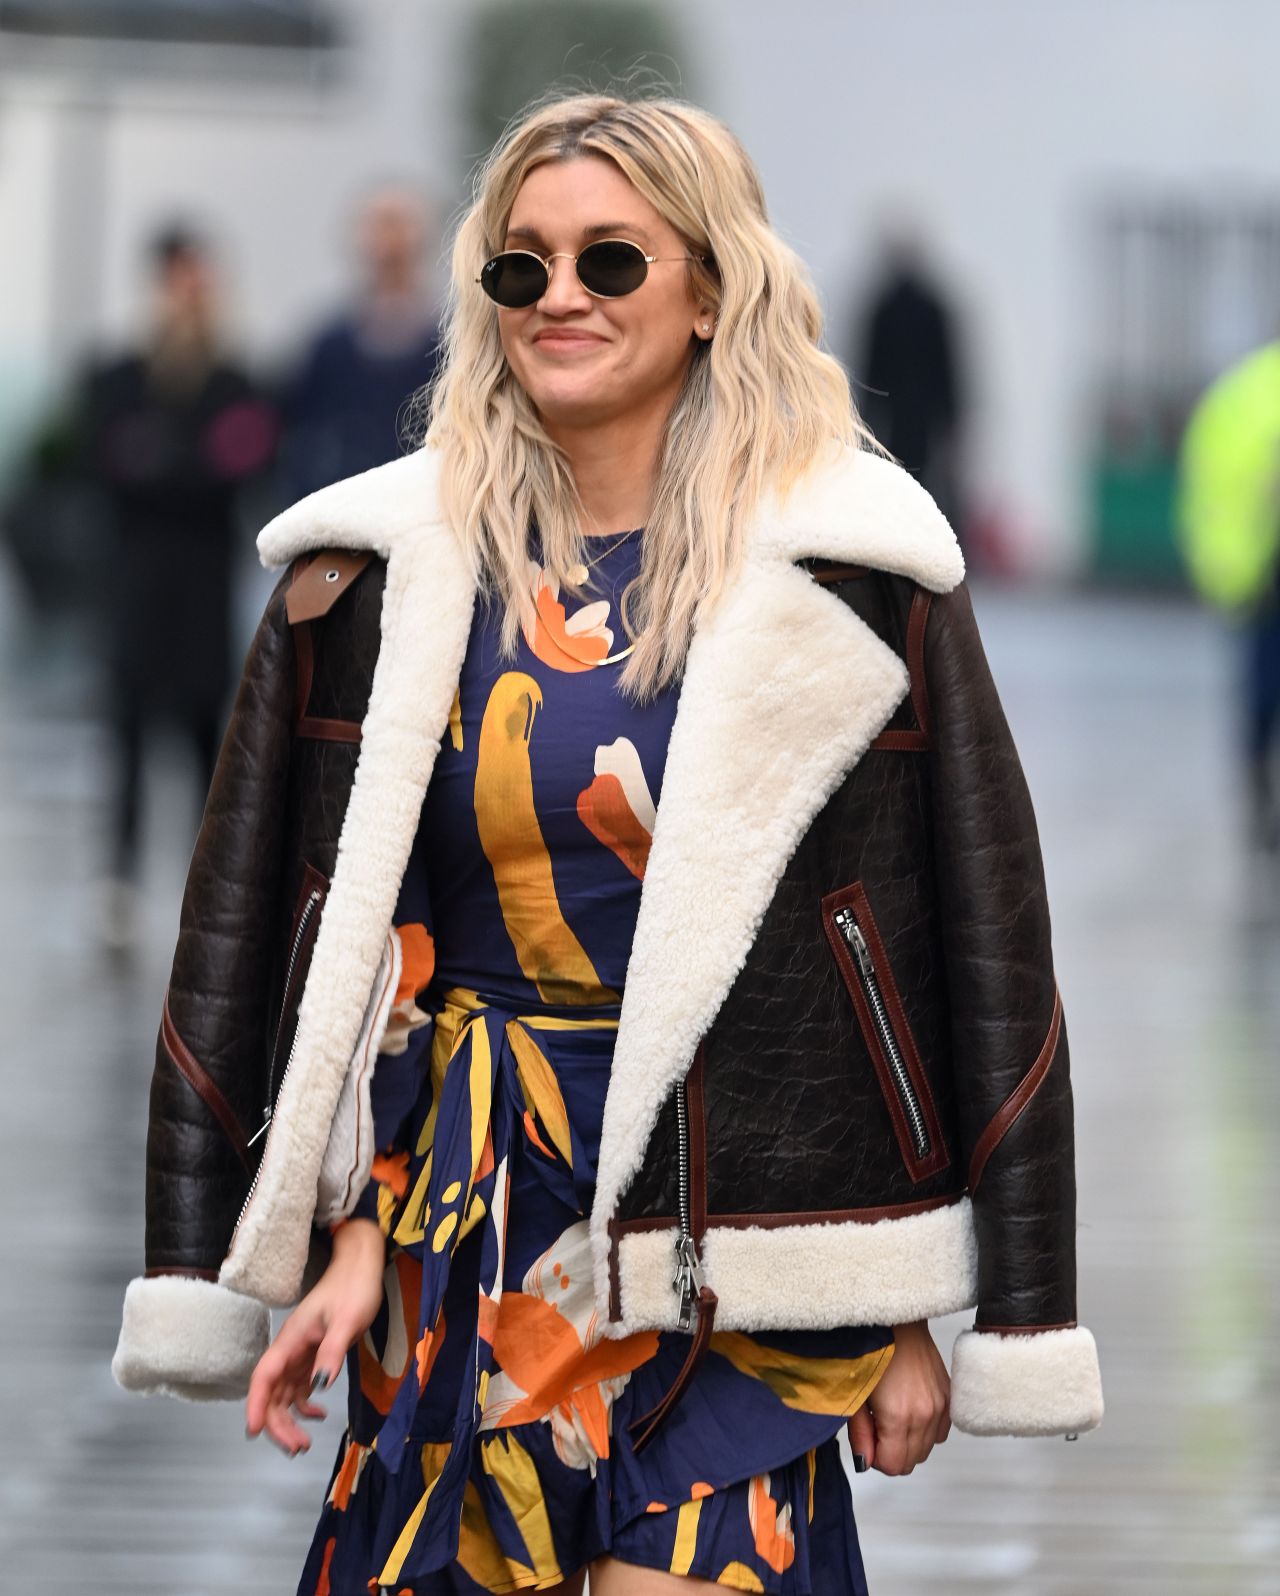 Ashley Roberts in a Retro Style Mini Dress and Knee-High Boots - London ...